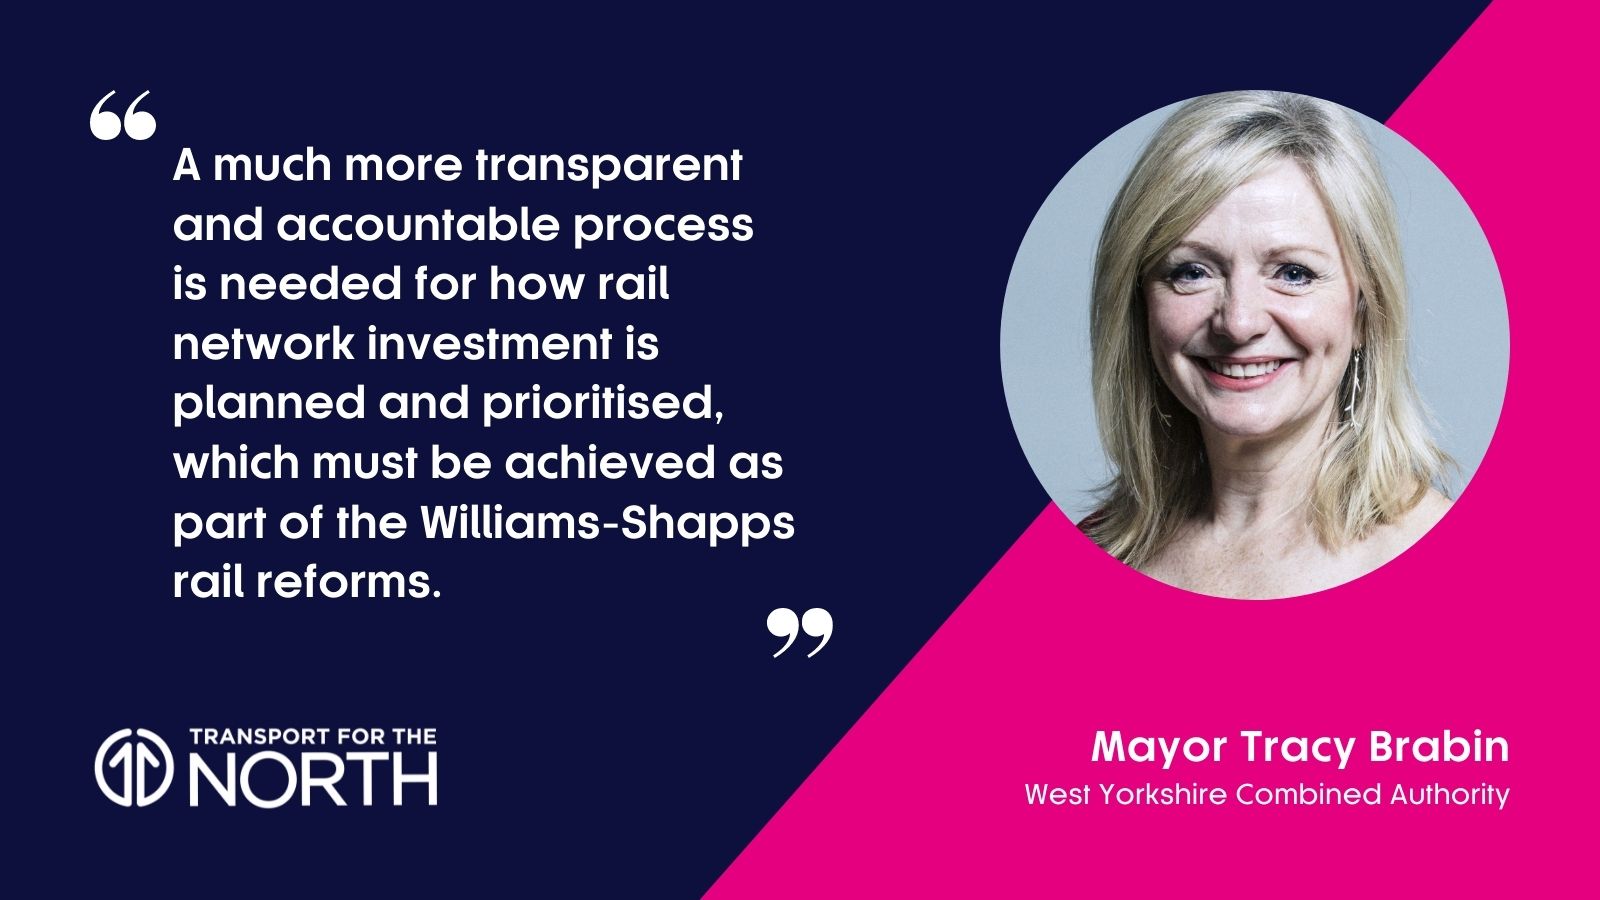 Mayor Tracy Brabin calls for more transparency around rail investment